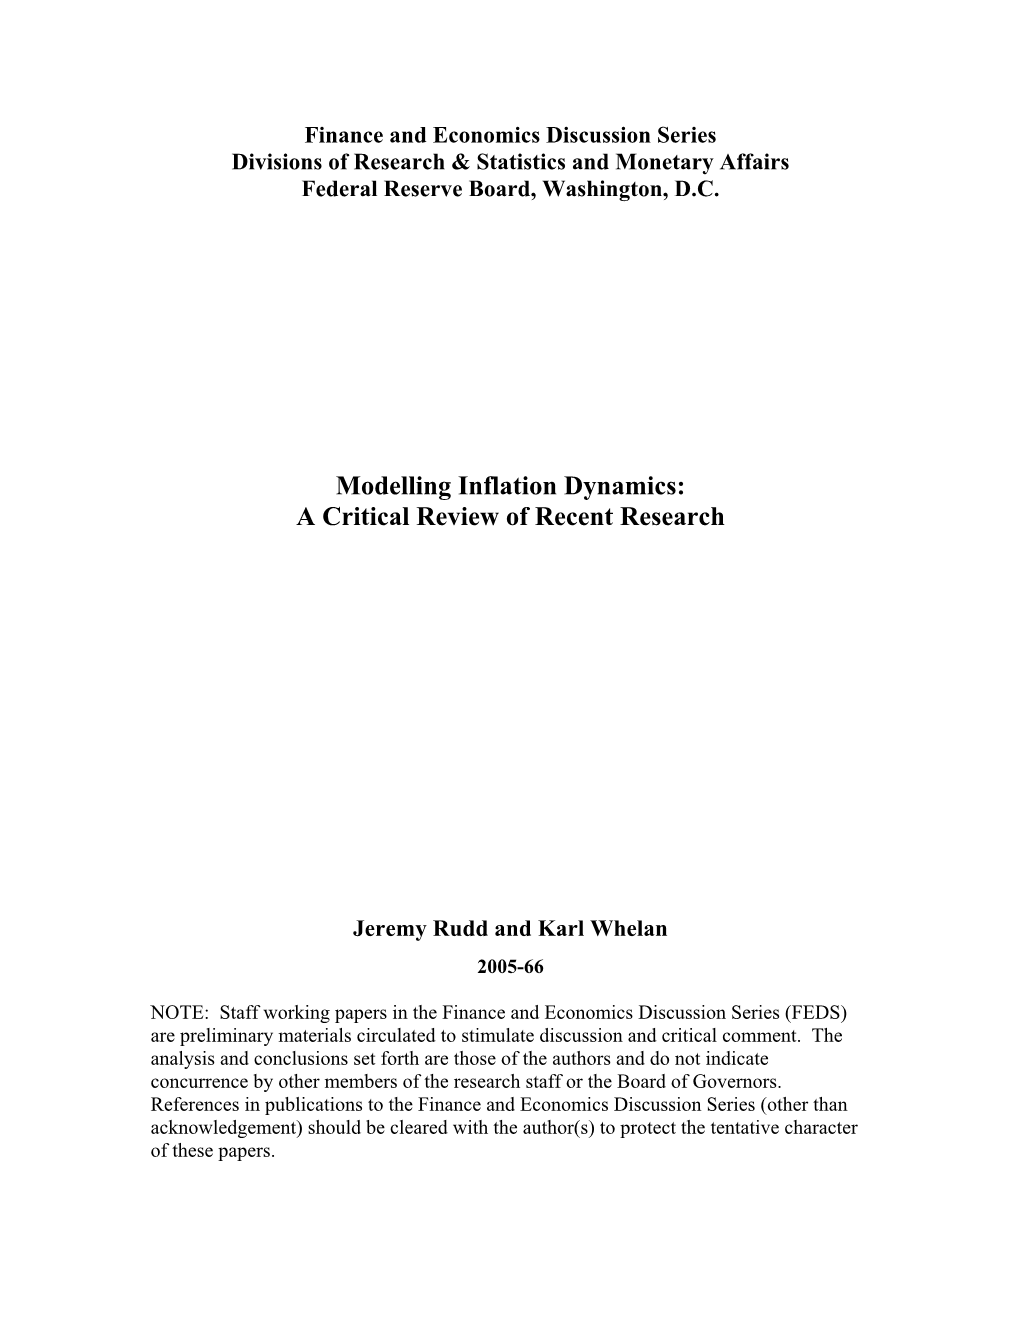 Modelling Inflation Dynamics: a Critical Review of Recent Research